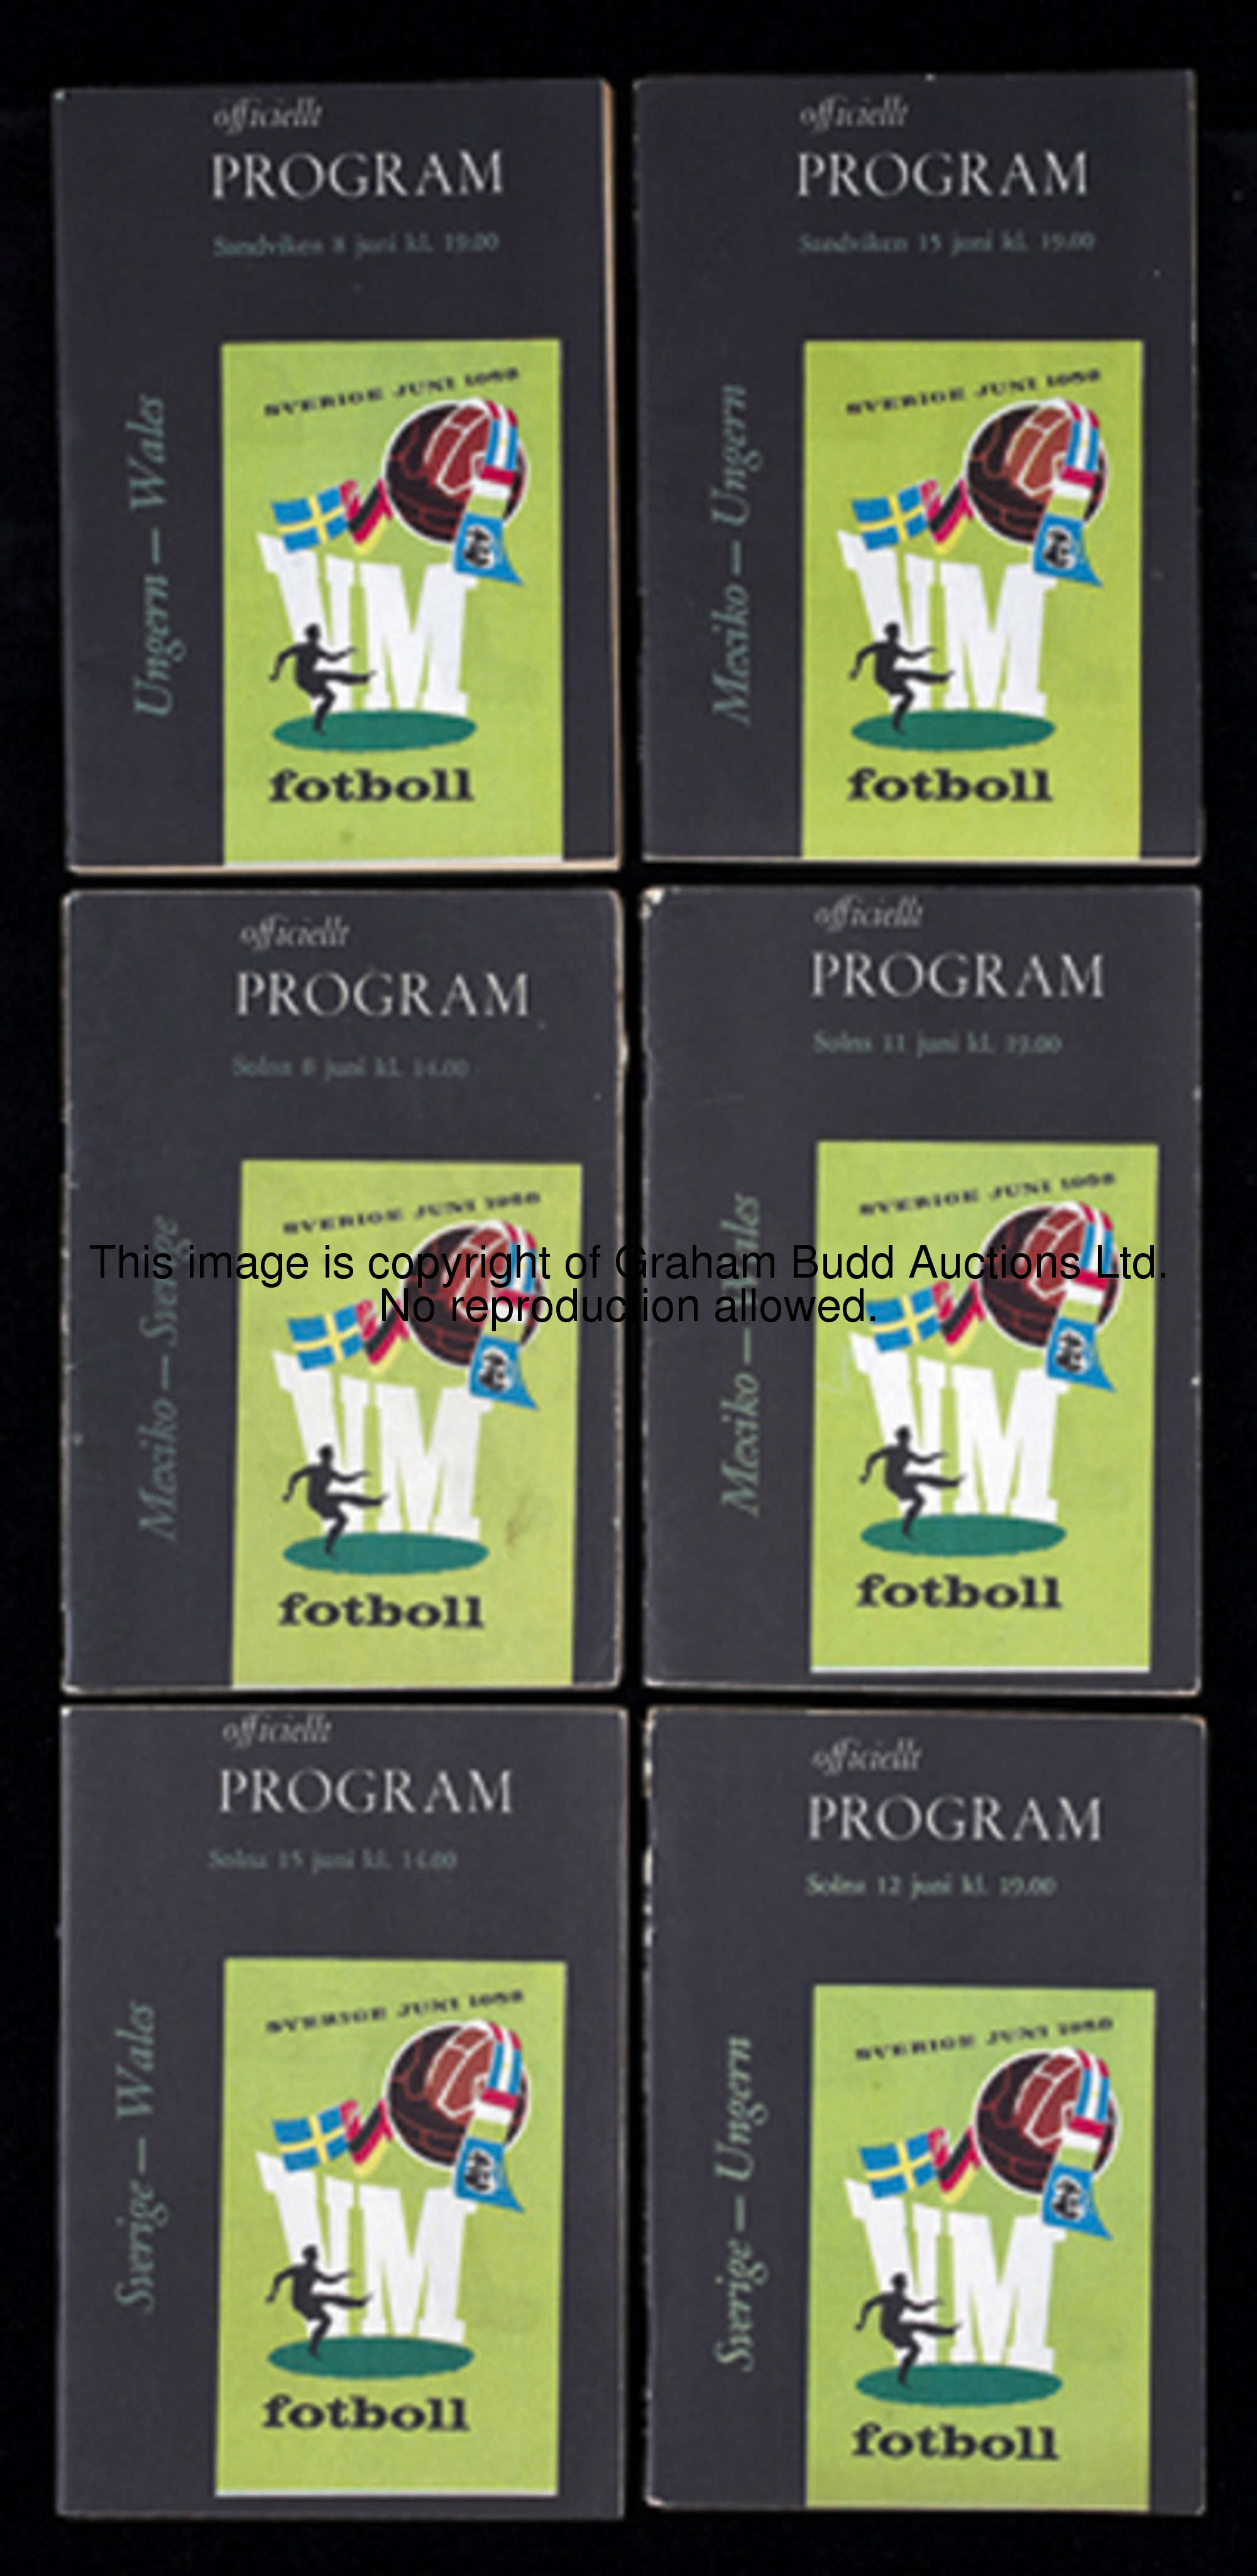 A complete set of six programmes for the Group Three matches at the 1958 World Cup, From Group Three...